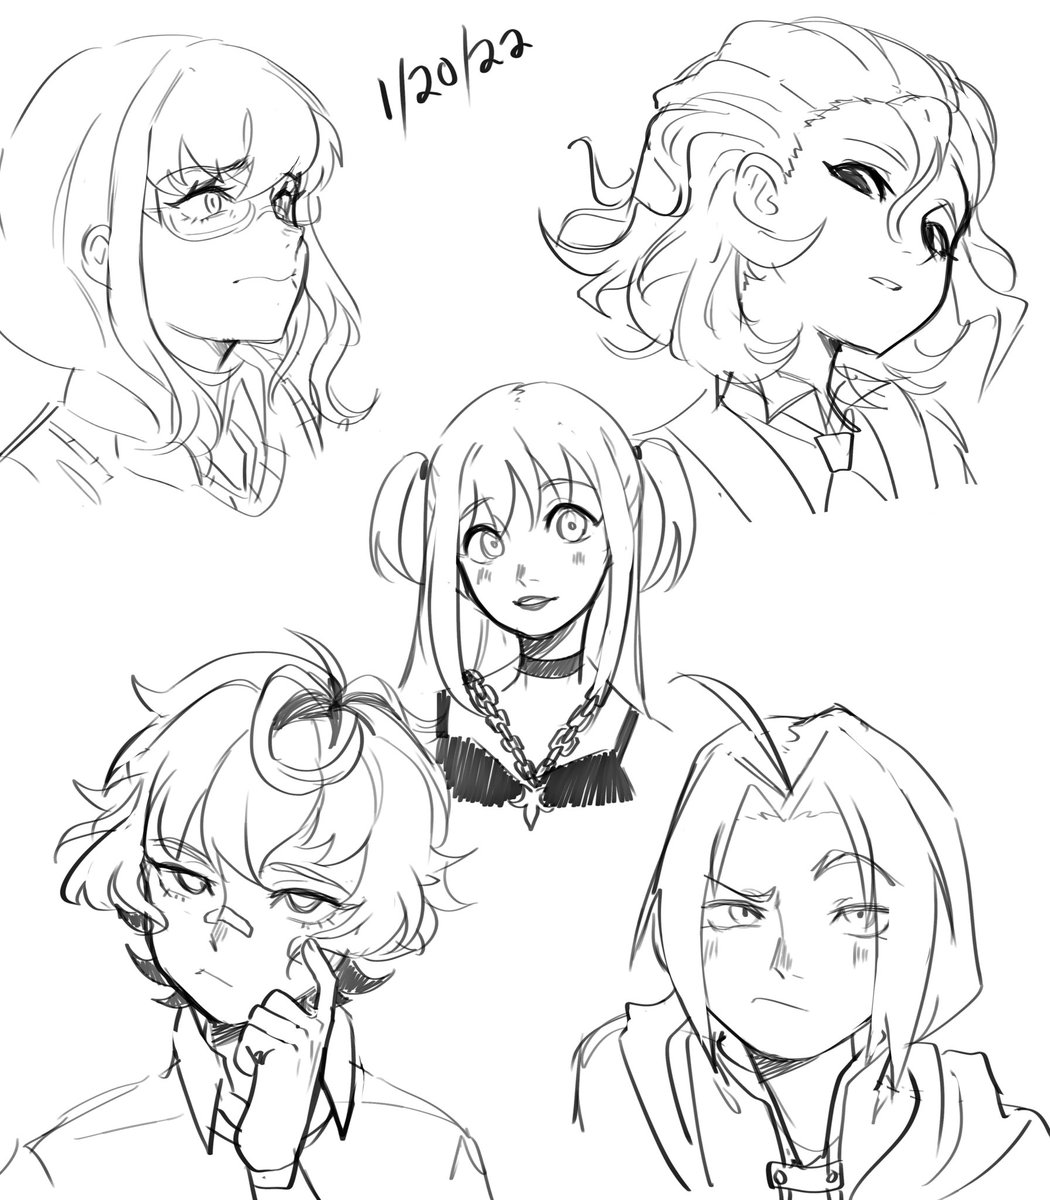 Warm-up busts 